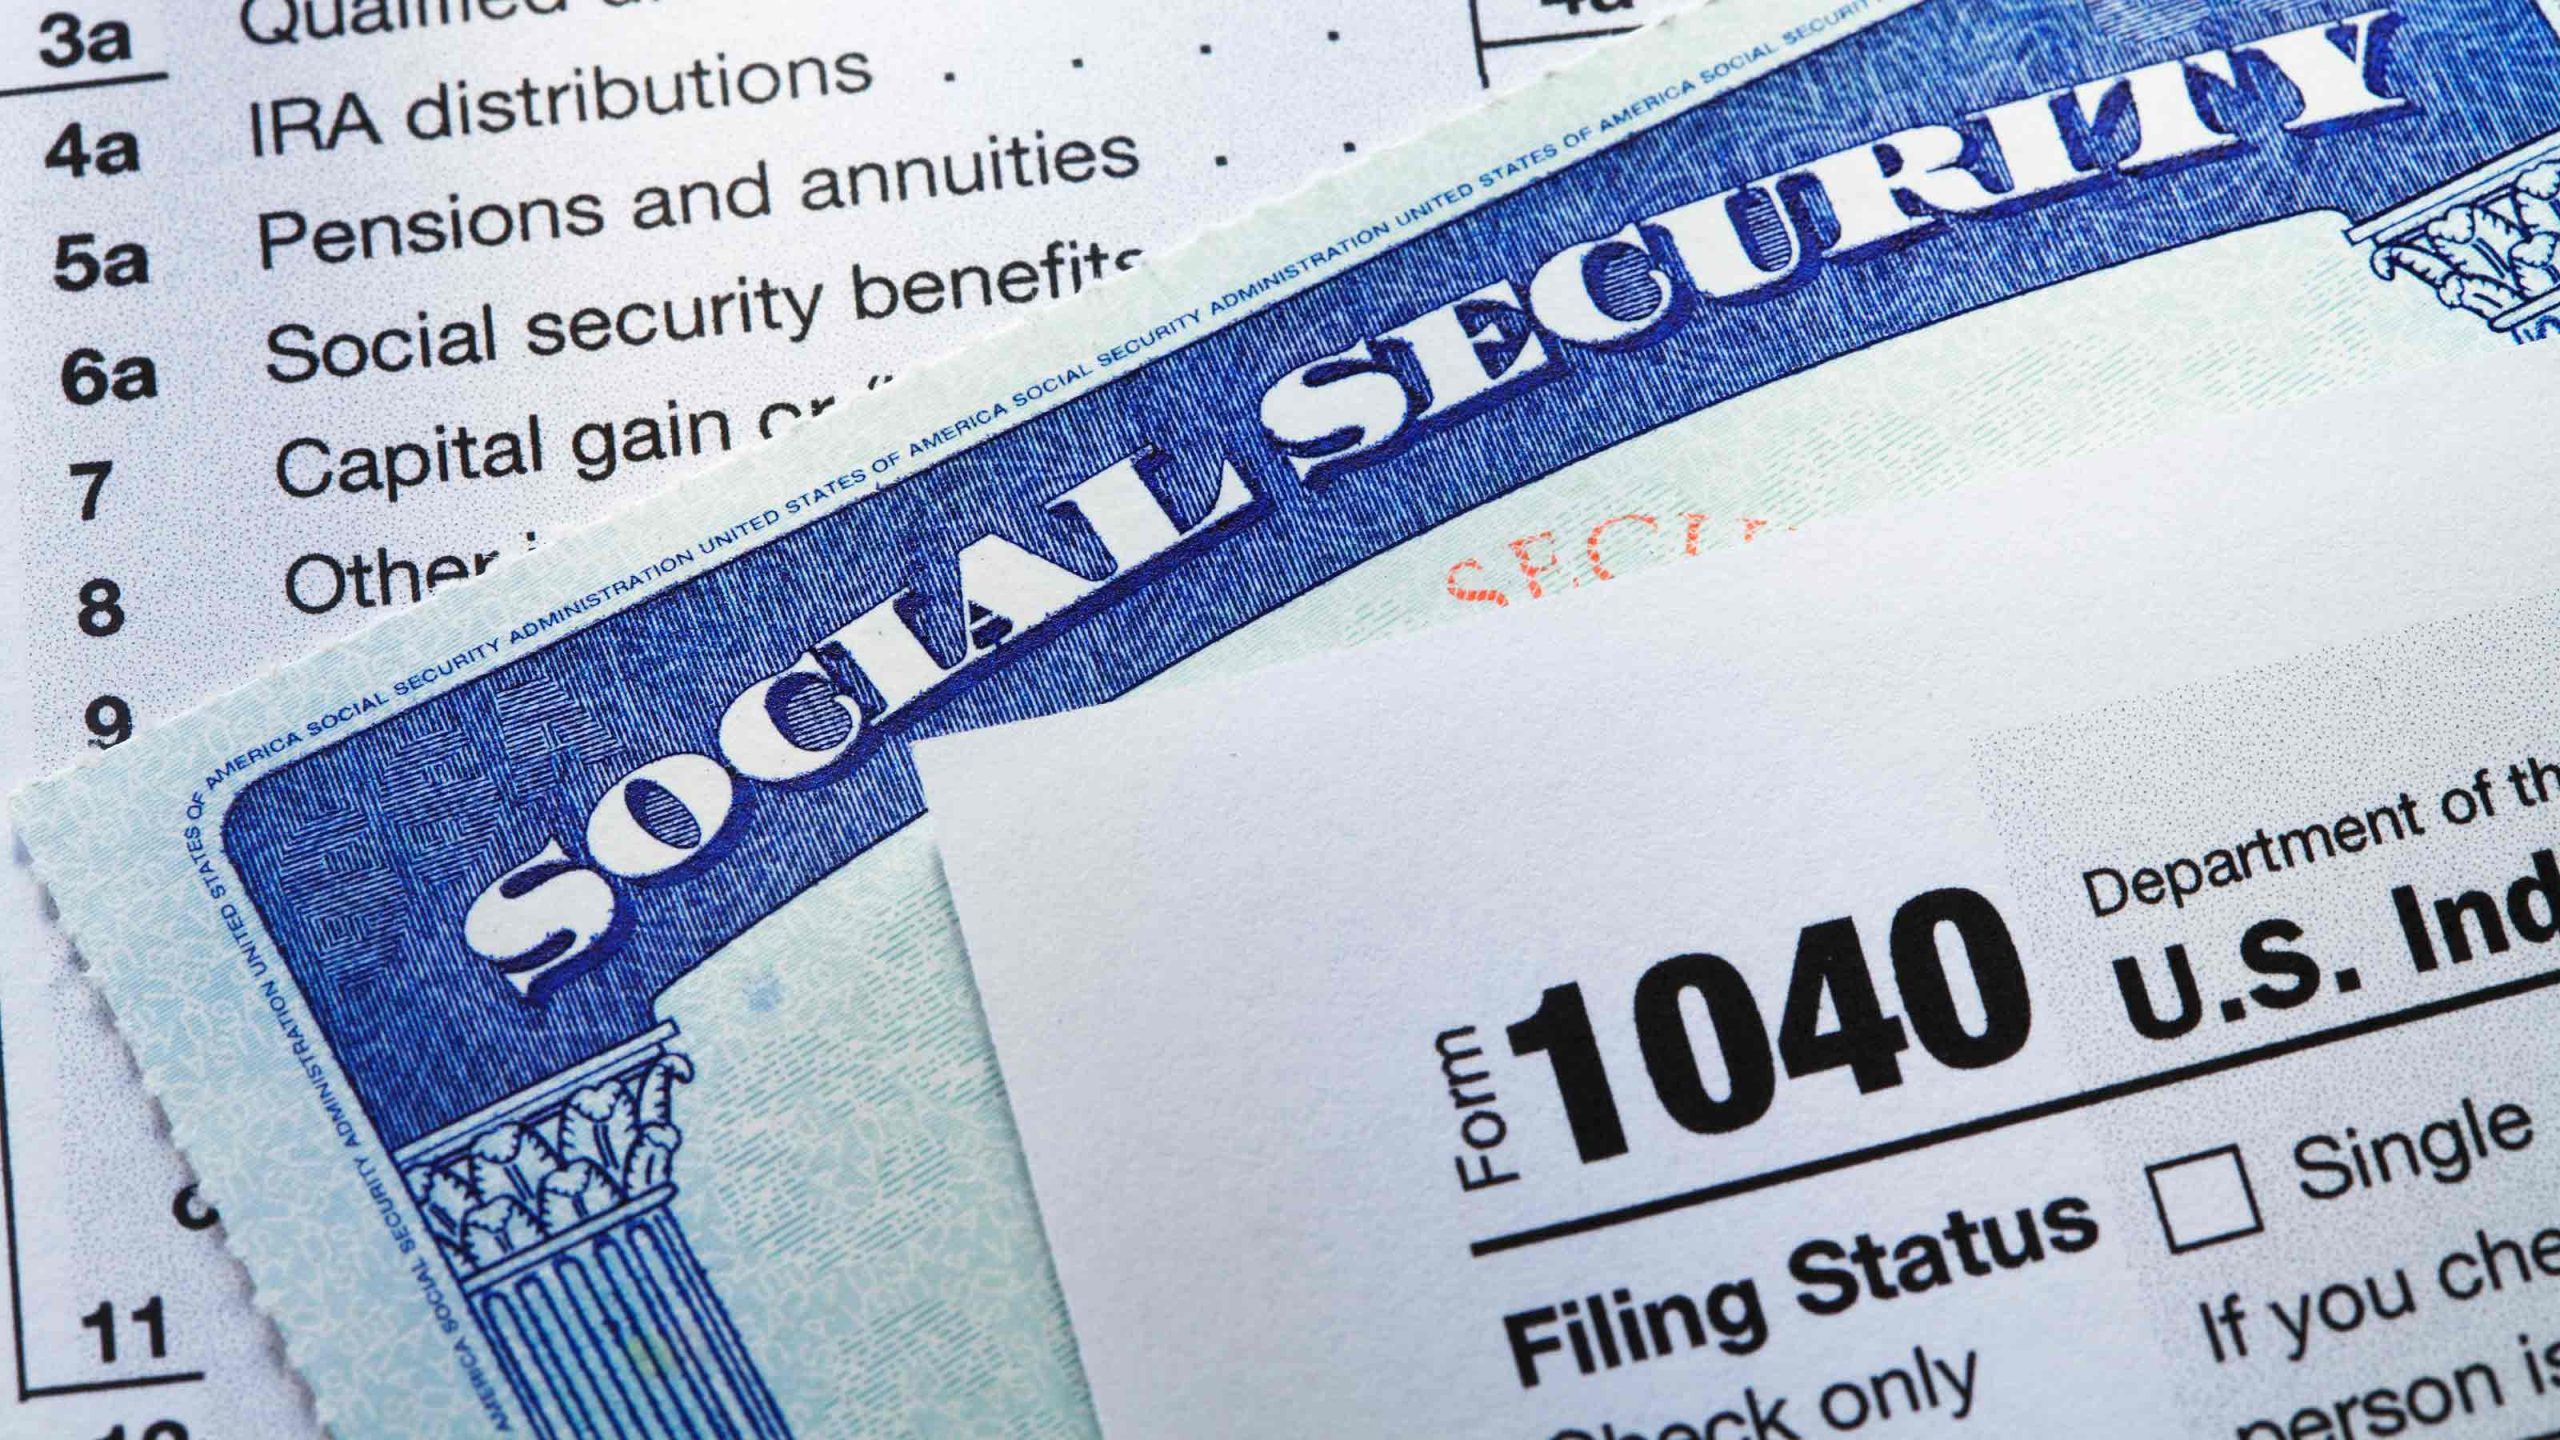 Ways on how to avoid the taxation of Social Security benefits. (Photo: Kiplinger)